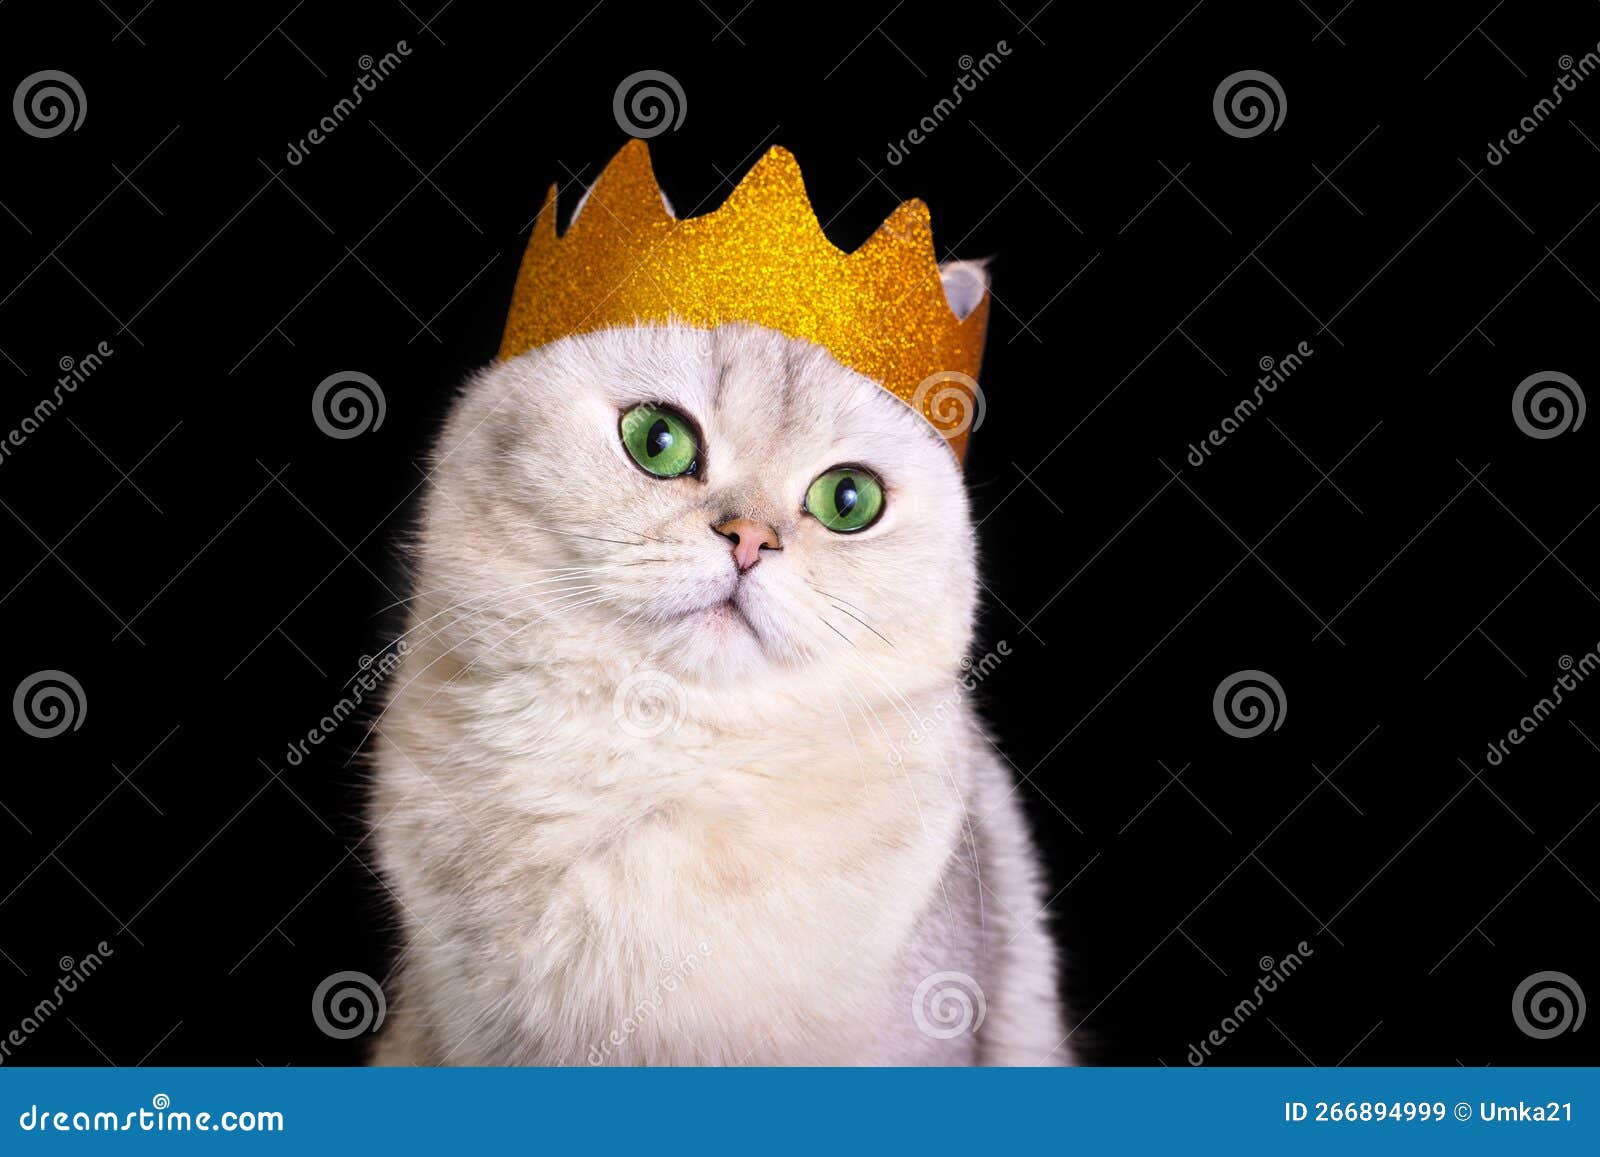 a close-up of a cute white royal cat in a golden crown, sitting on black background